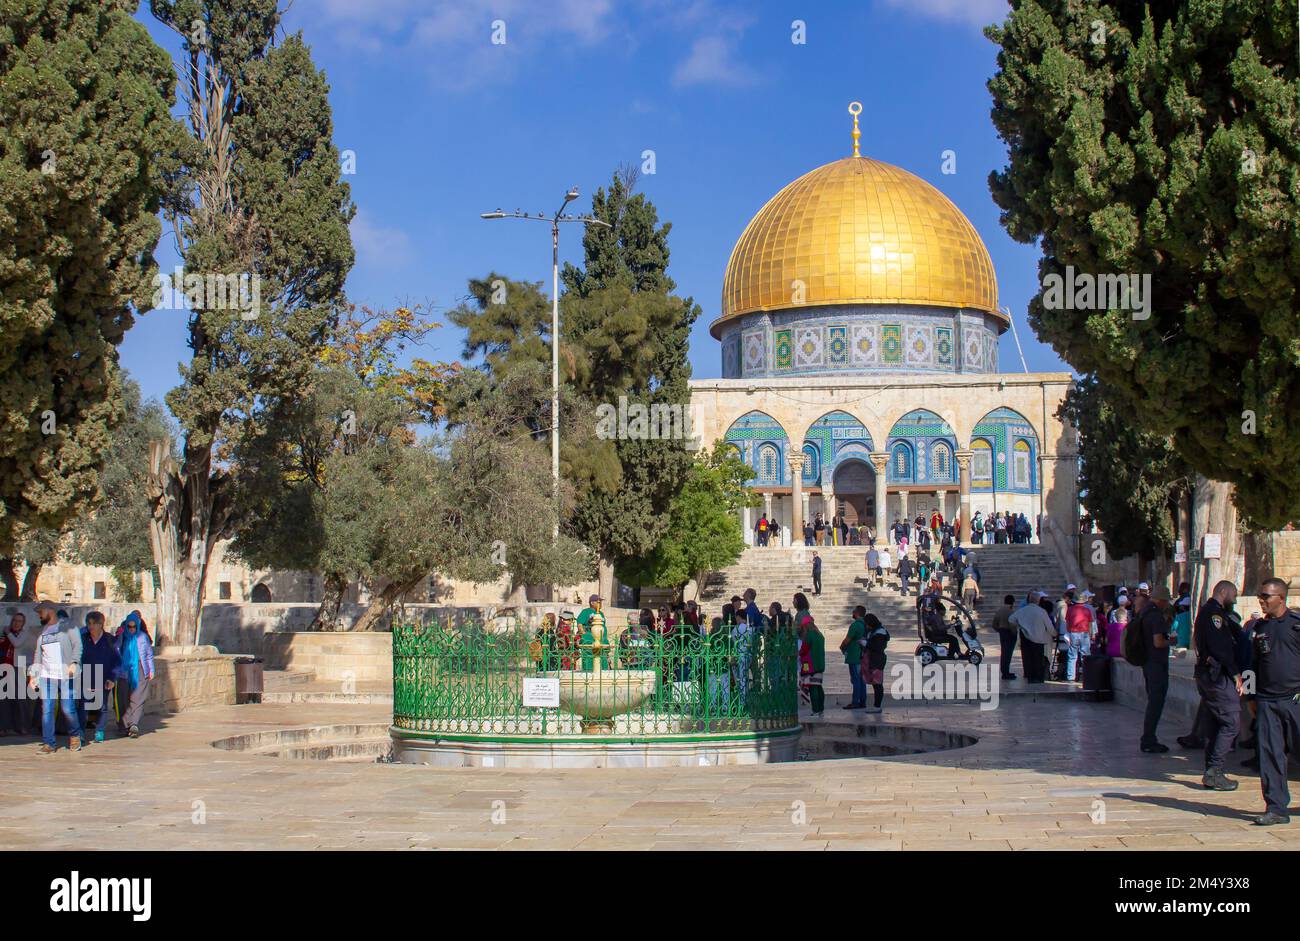 10 Nov 2022 Tourists on the precints of the ancient Dome of the Rock Islamic Holy Place. Built on the site of the ancient Jewish Biblical Solomon's Te Stock Photo